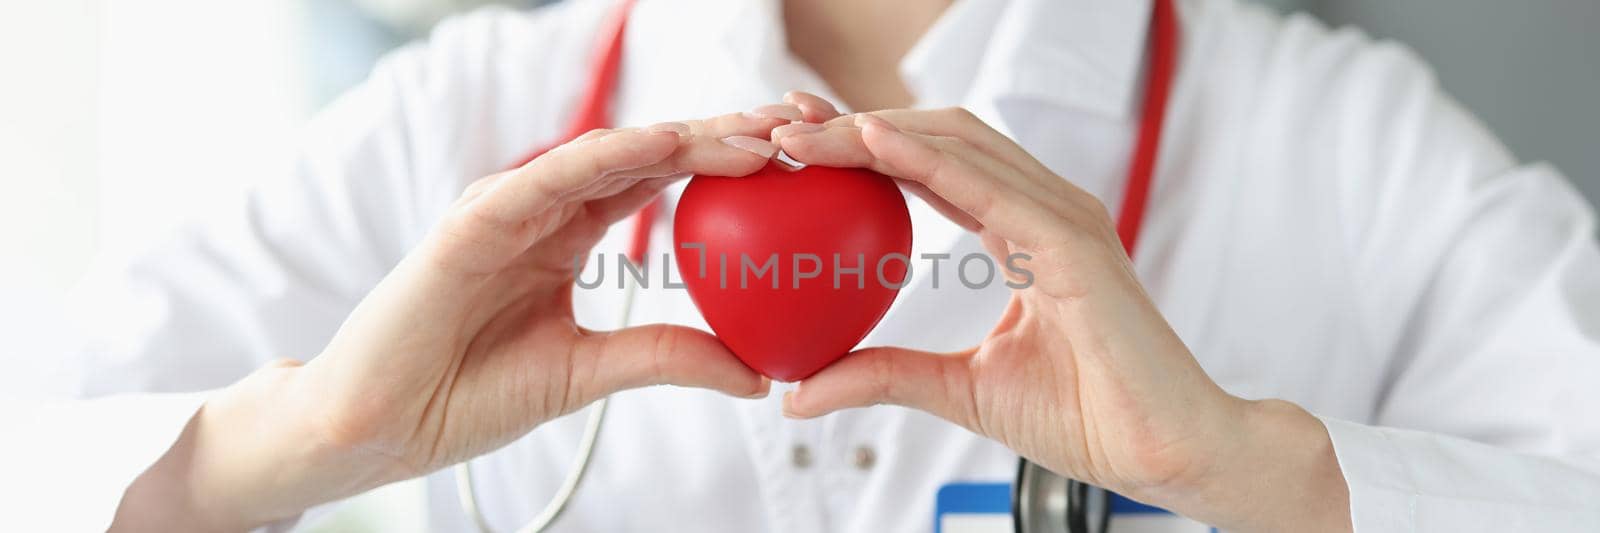 Close-up of cardiologist holding heart in hands. Treatment and healing with professional nurse and doctors. Heart disease, organ donation and cardiology concept